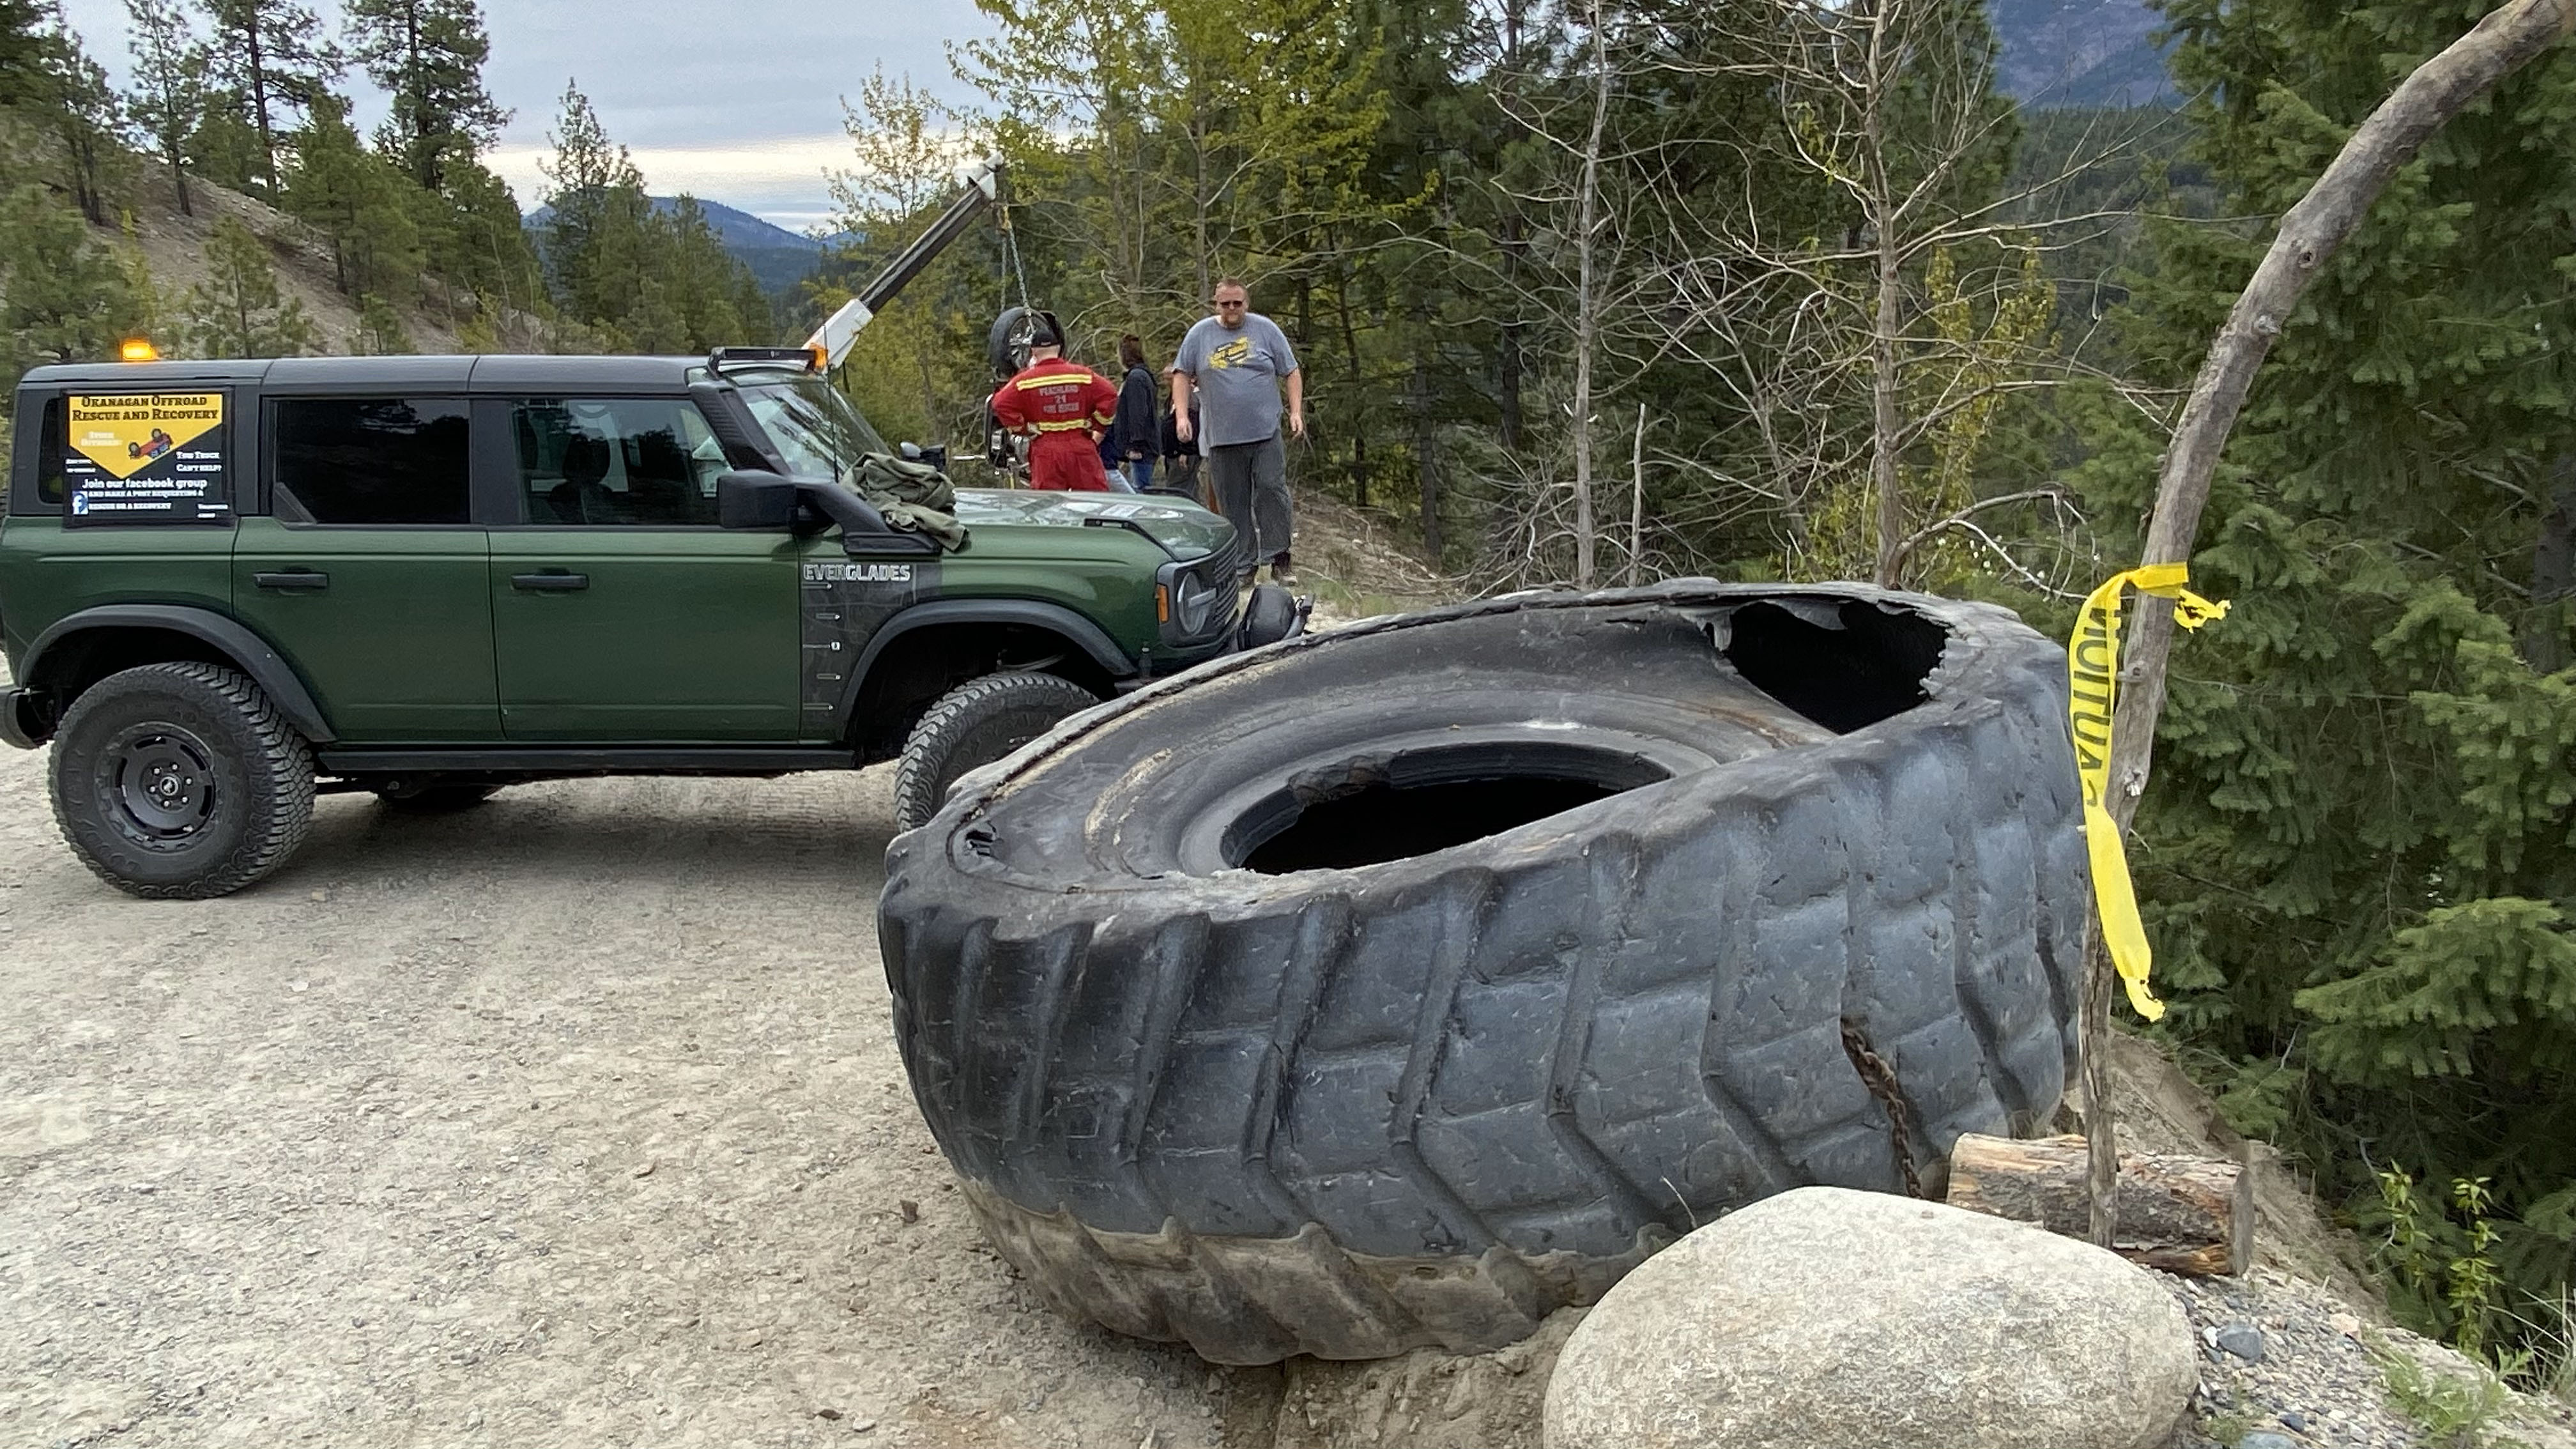 Motorcycle, massive tire among garbage pulled from Peachland ravine
during cleanup